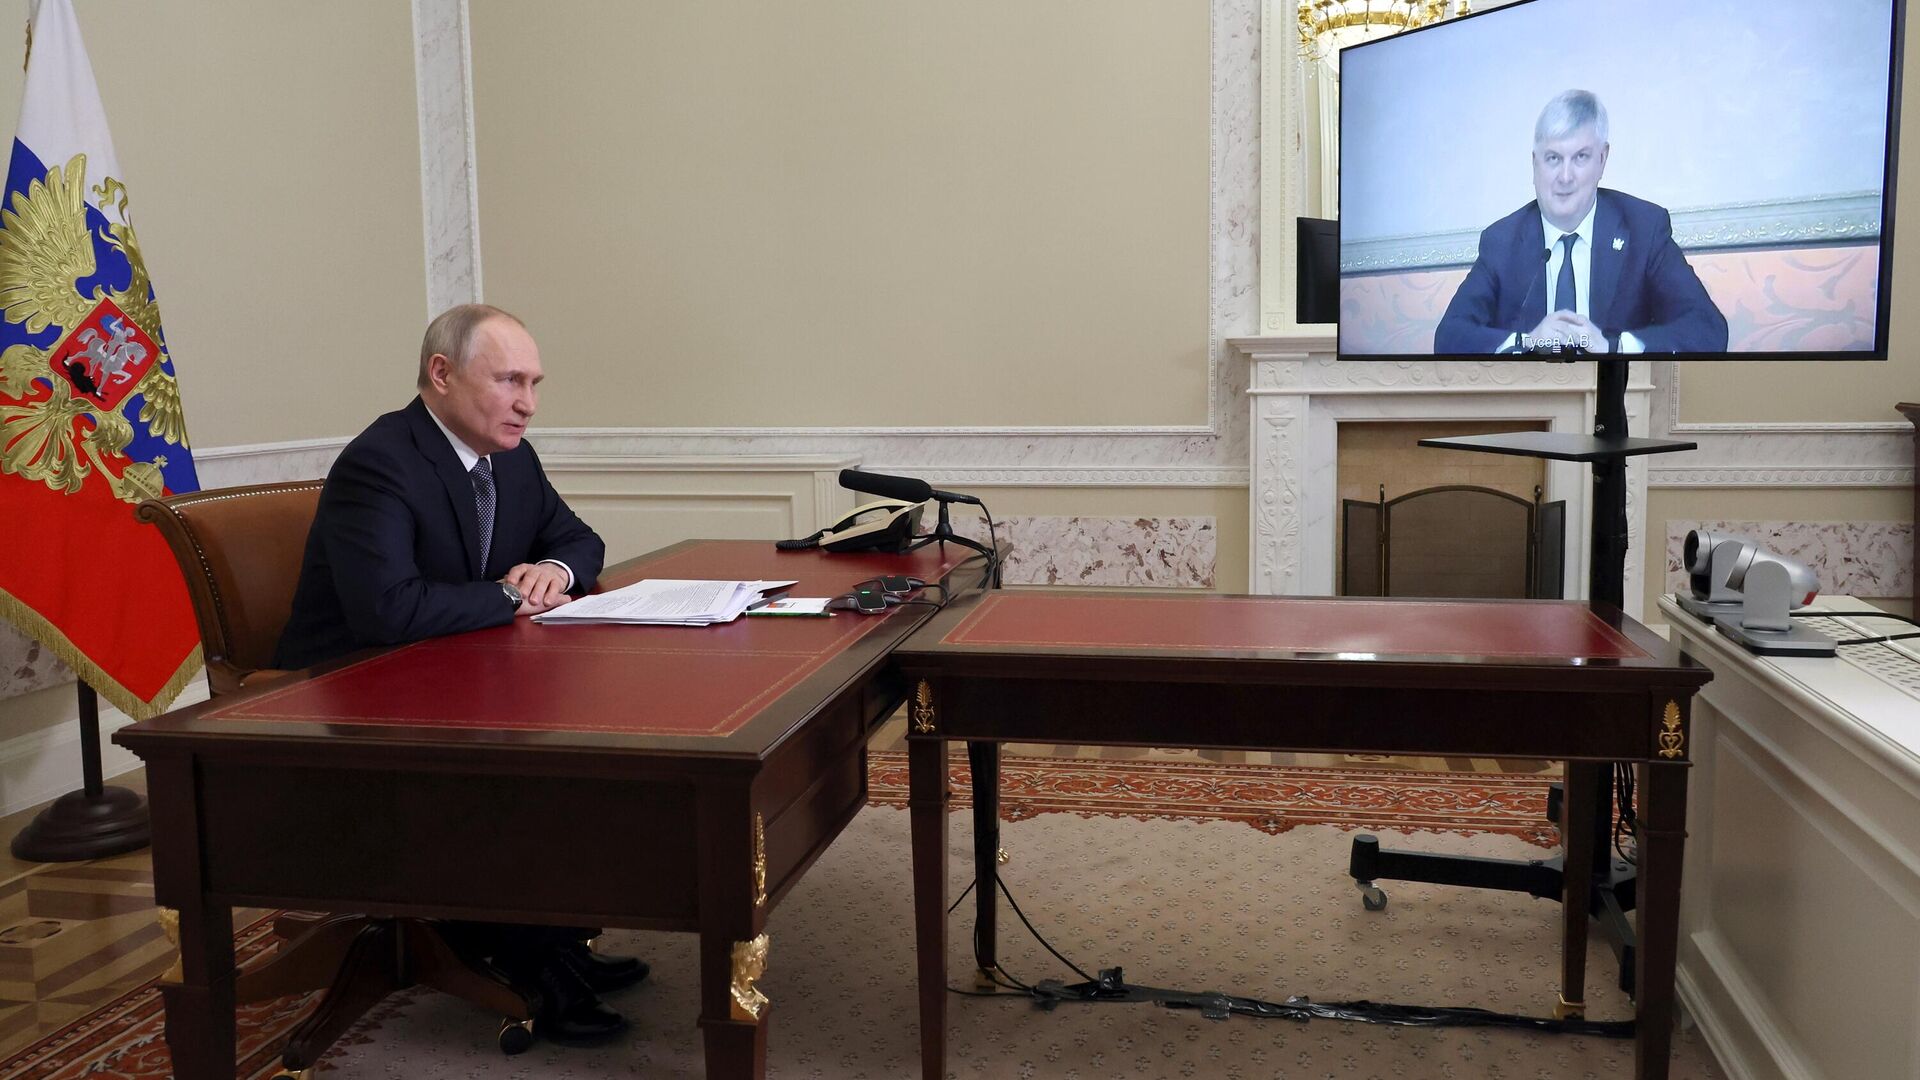 Putin met with the governor of the Voronezh region